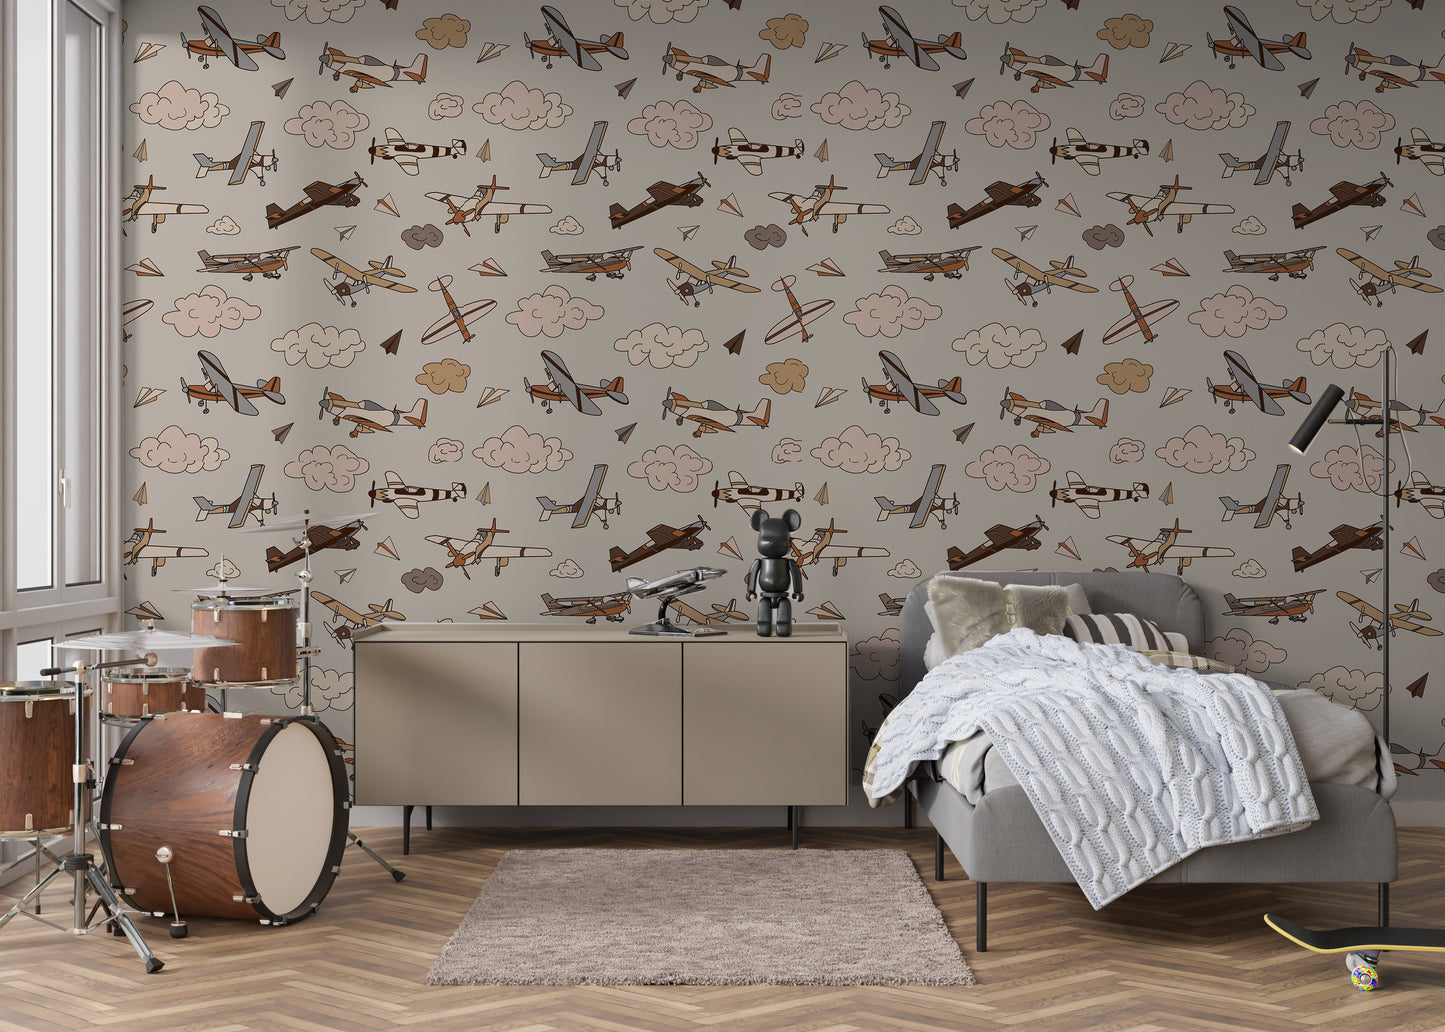 Neutral Airplane Removable Peel And Stick Wallpaper